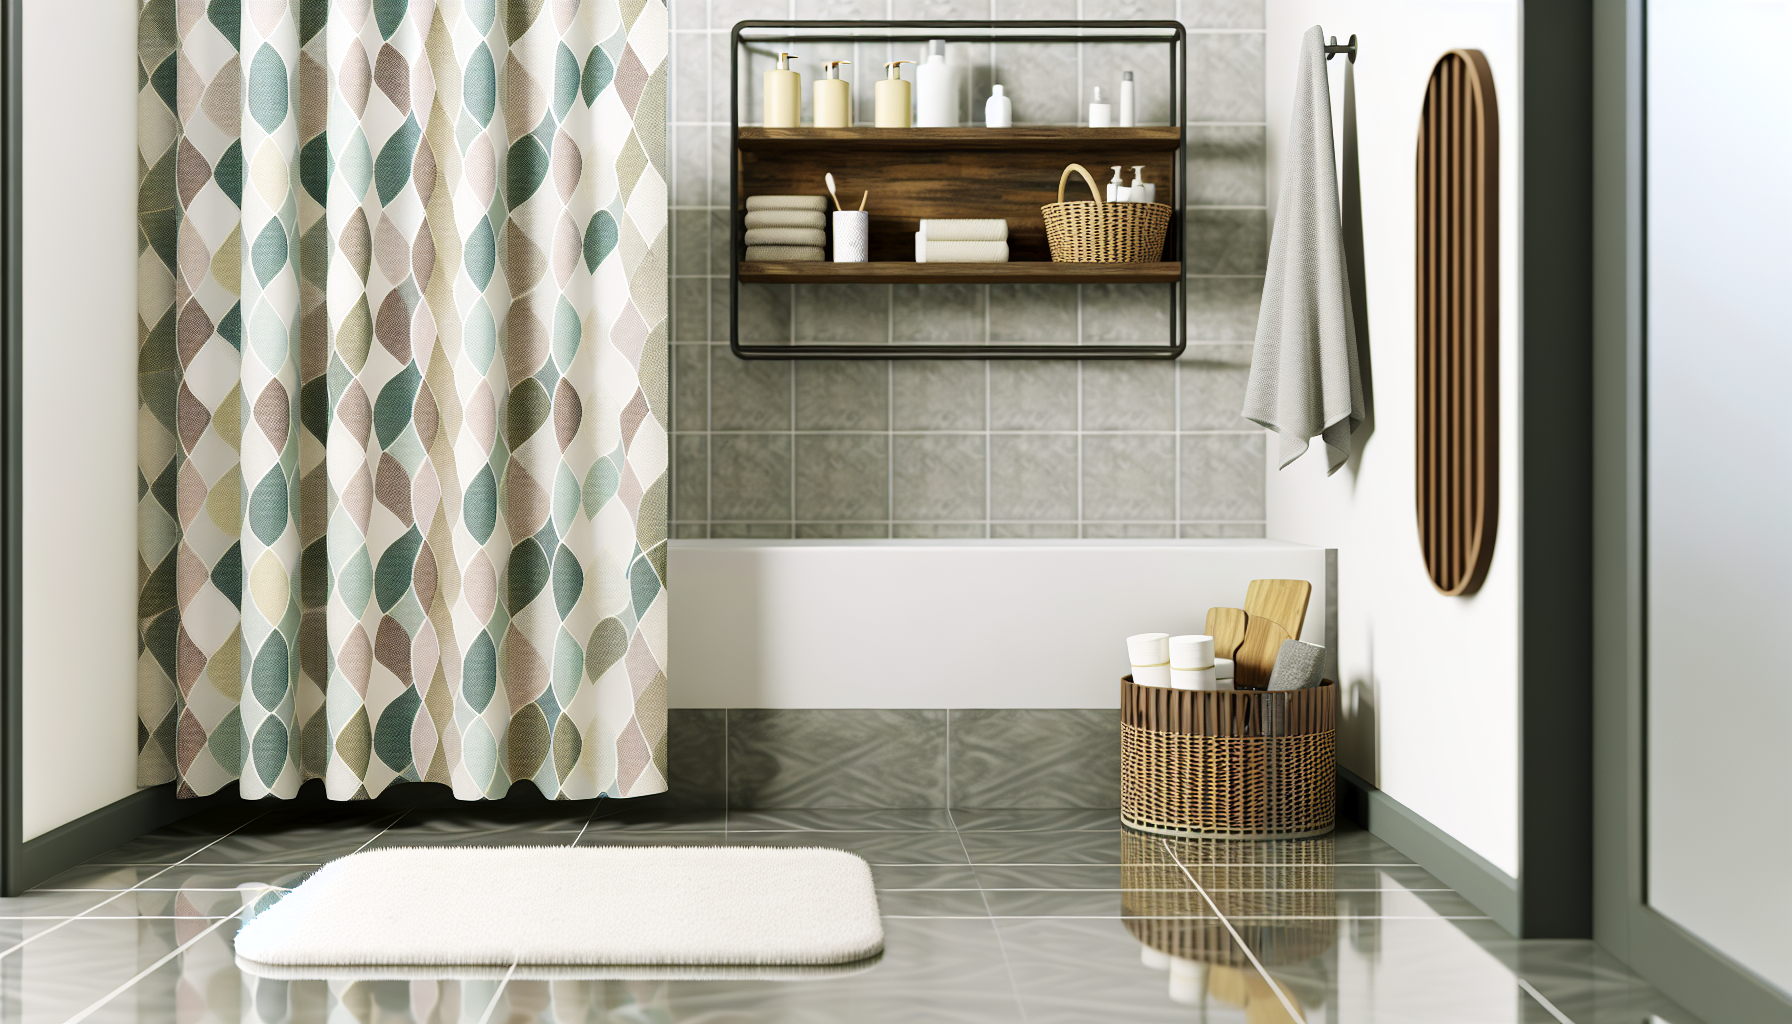 Stylish shower curtain and functional storage solutions in a bathroom